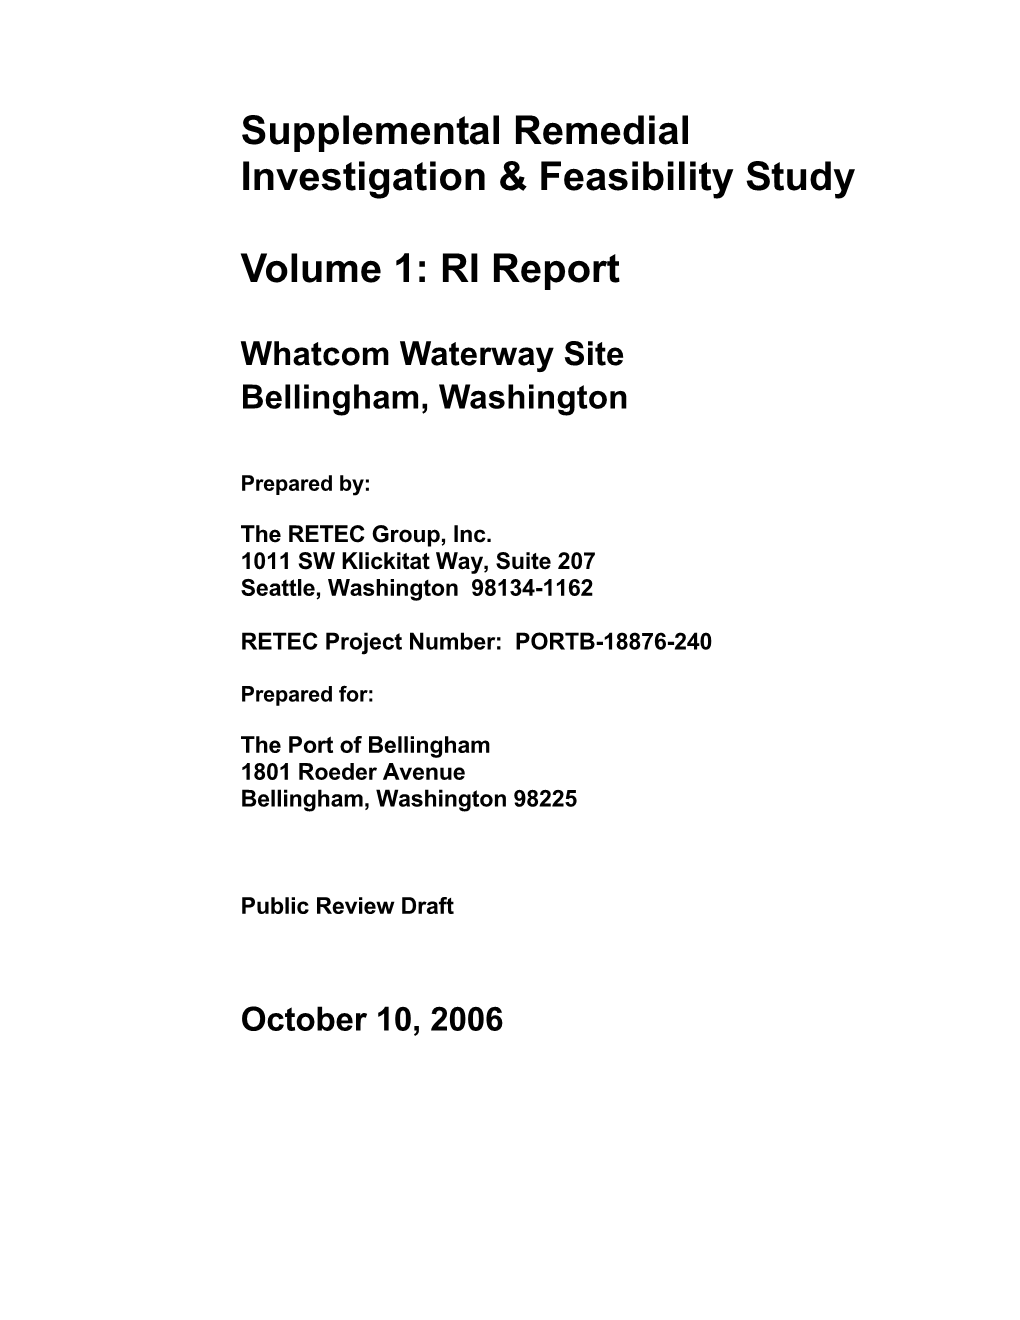 Supplemental Remedial Investigation & Feasibility Study Volume 1